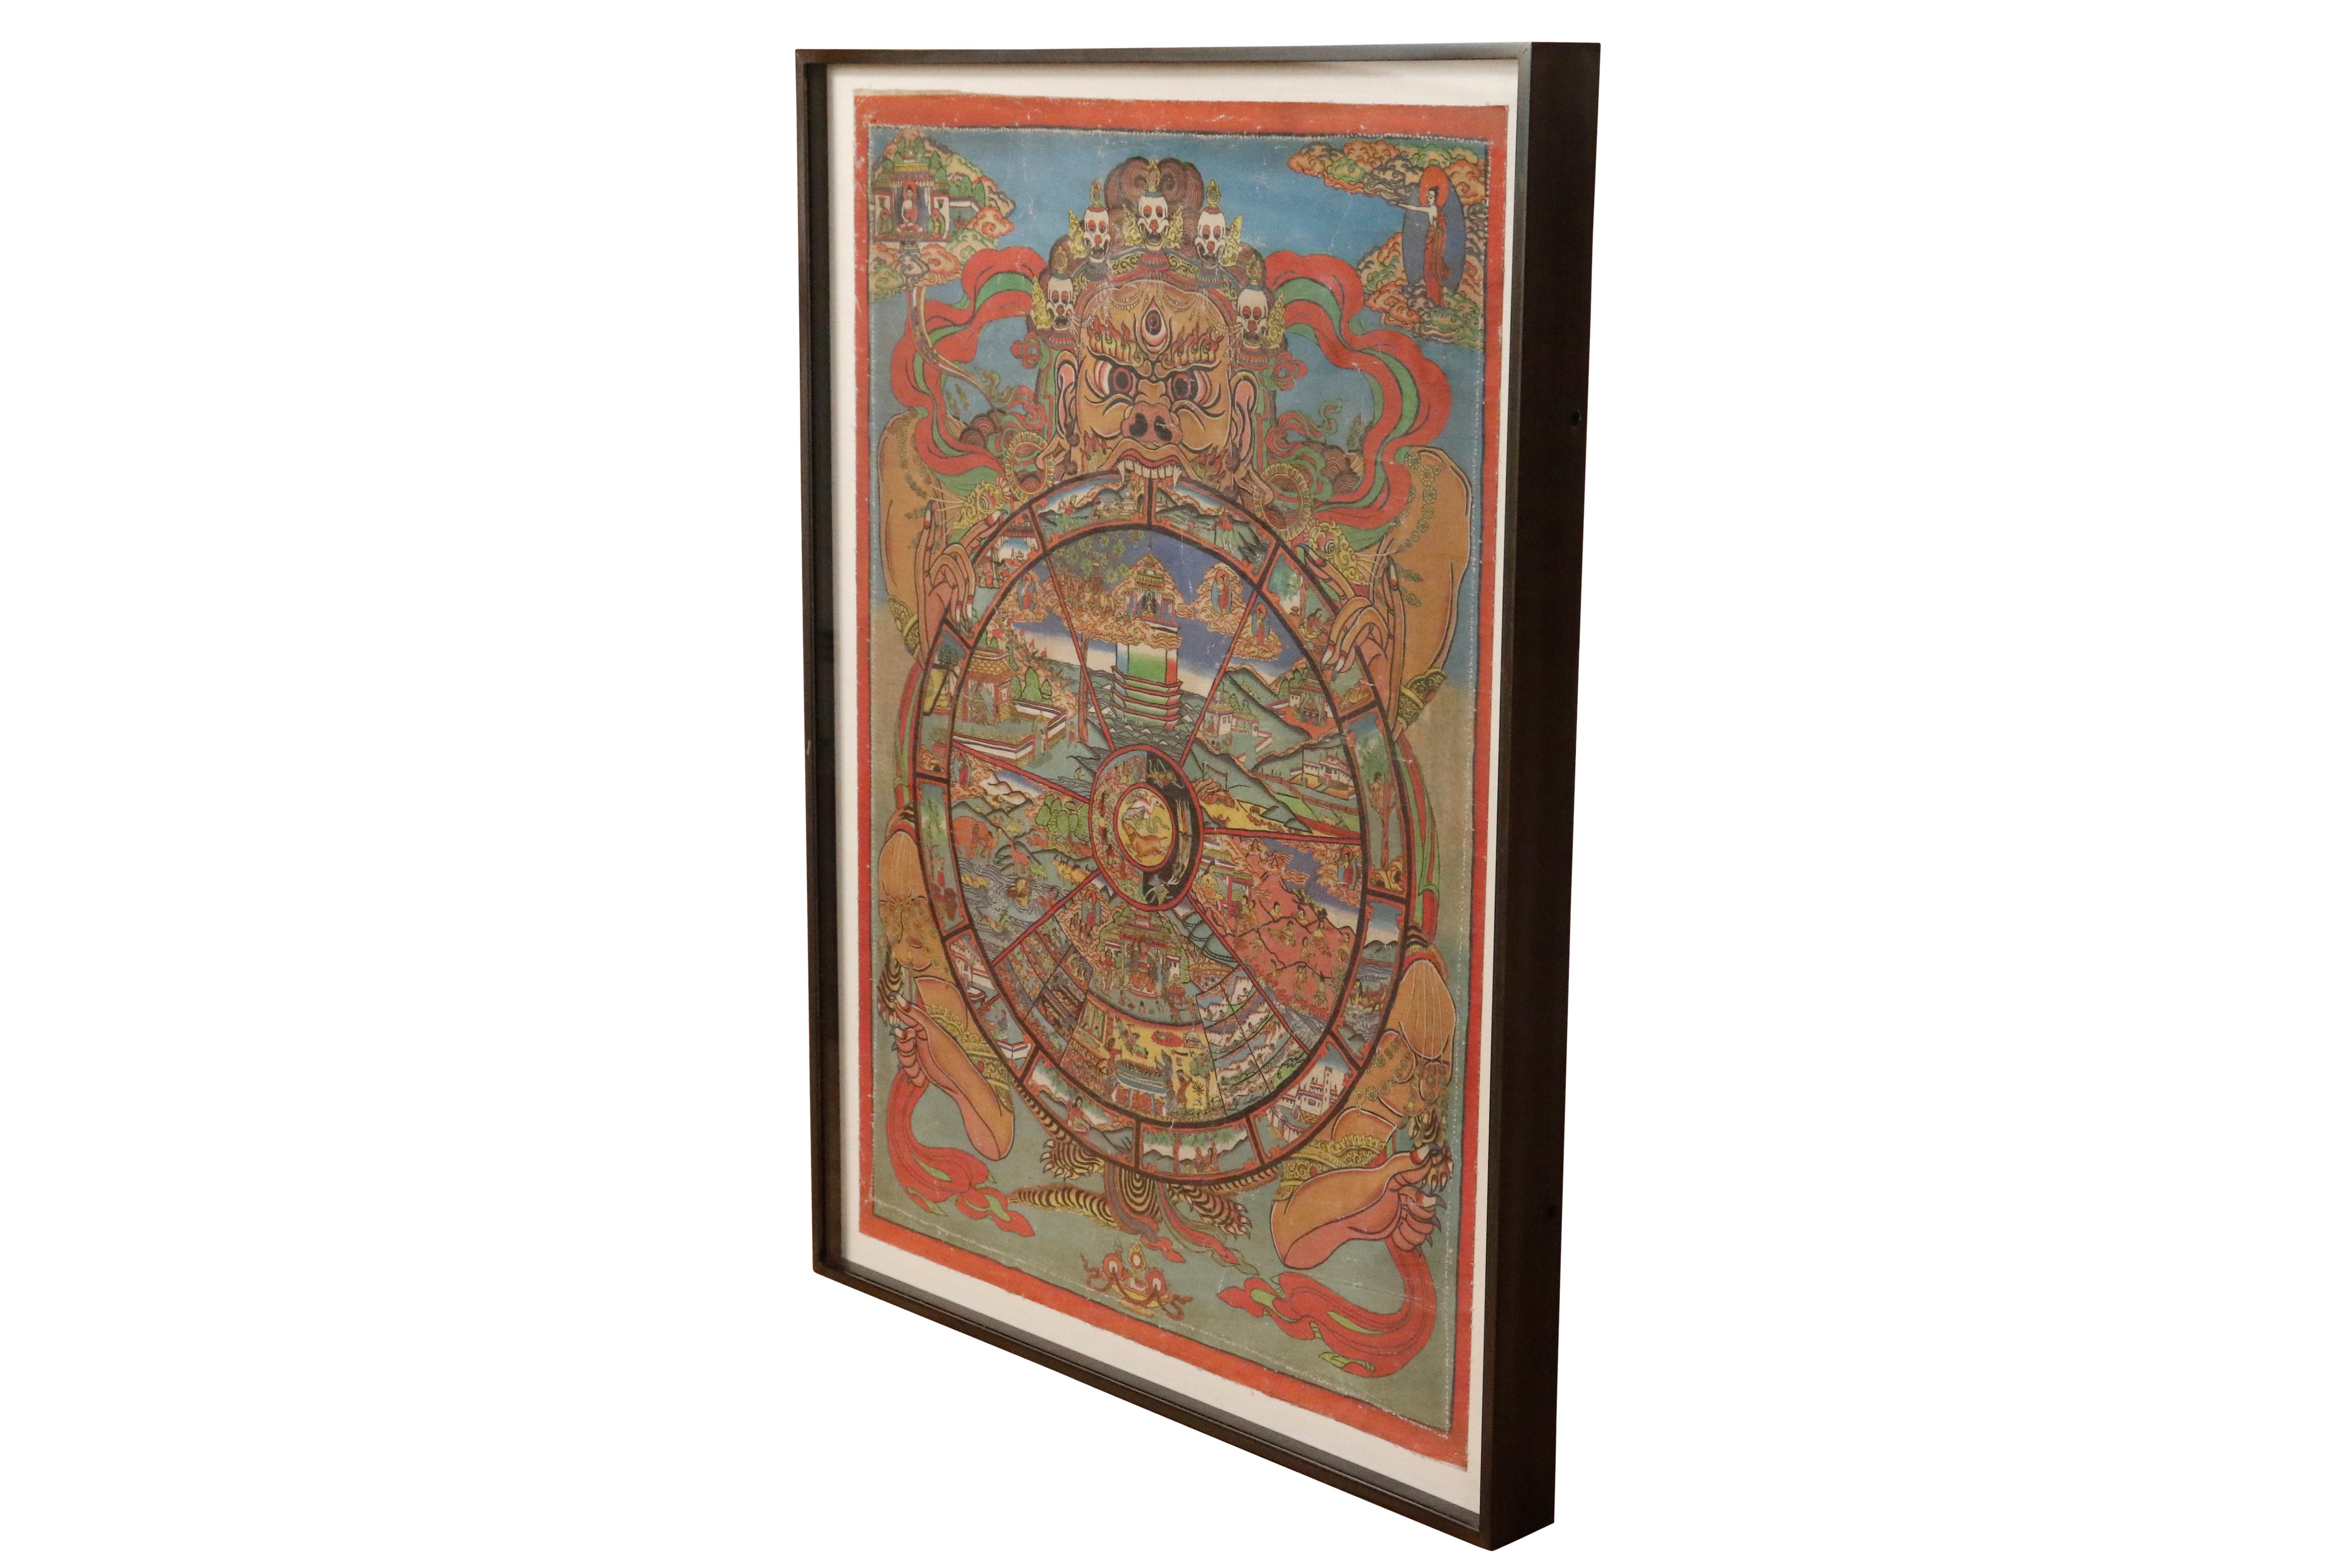 A framed Tibetan Buddhist thangka (a painted wall hanging) of Bhavacakra. Depicts Samsara, the 